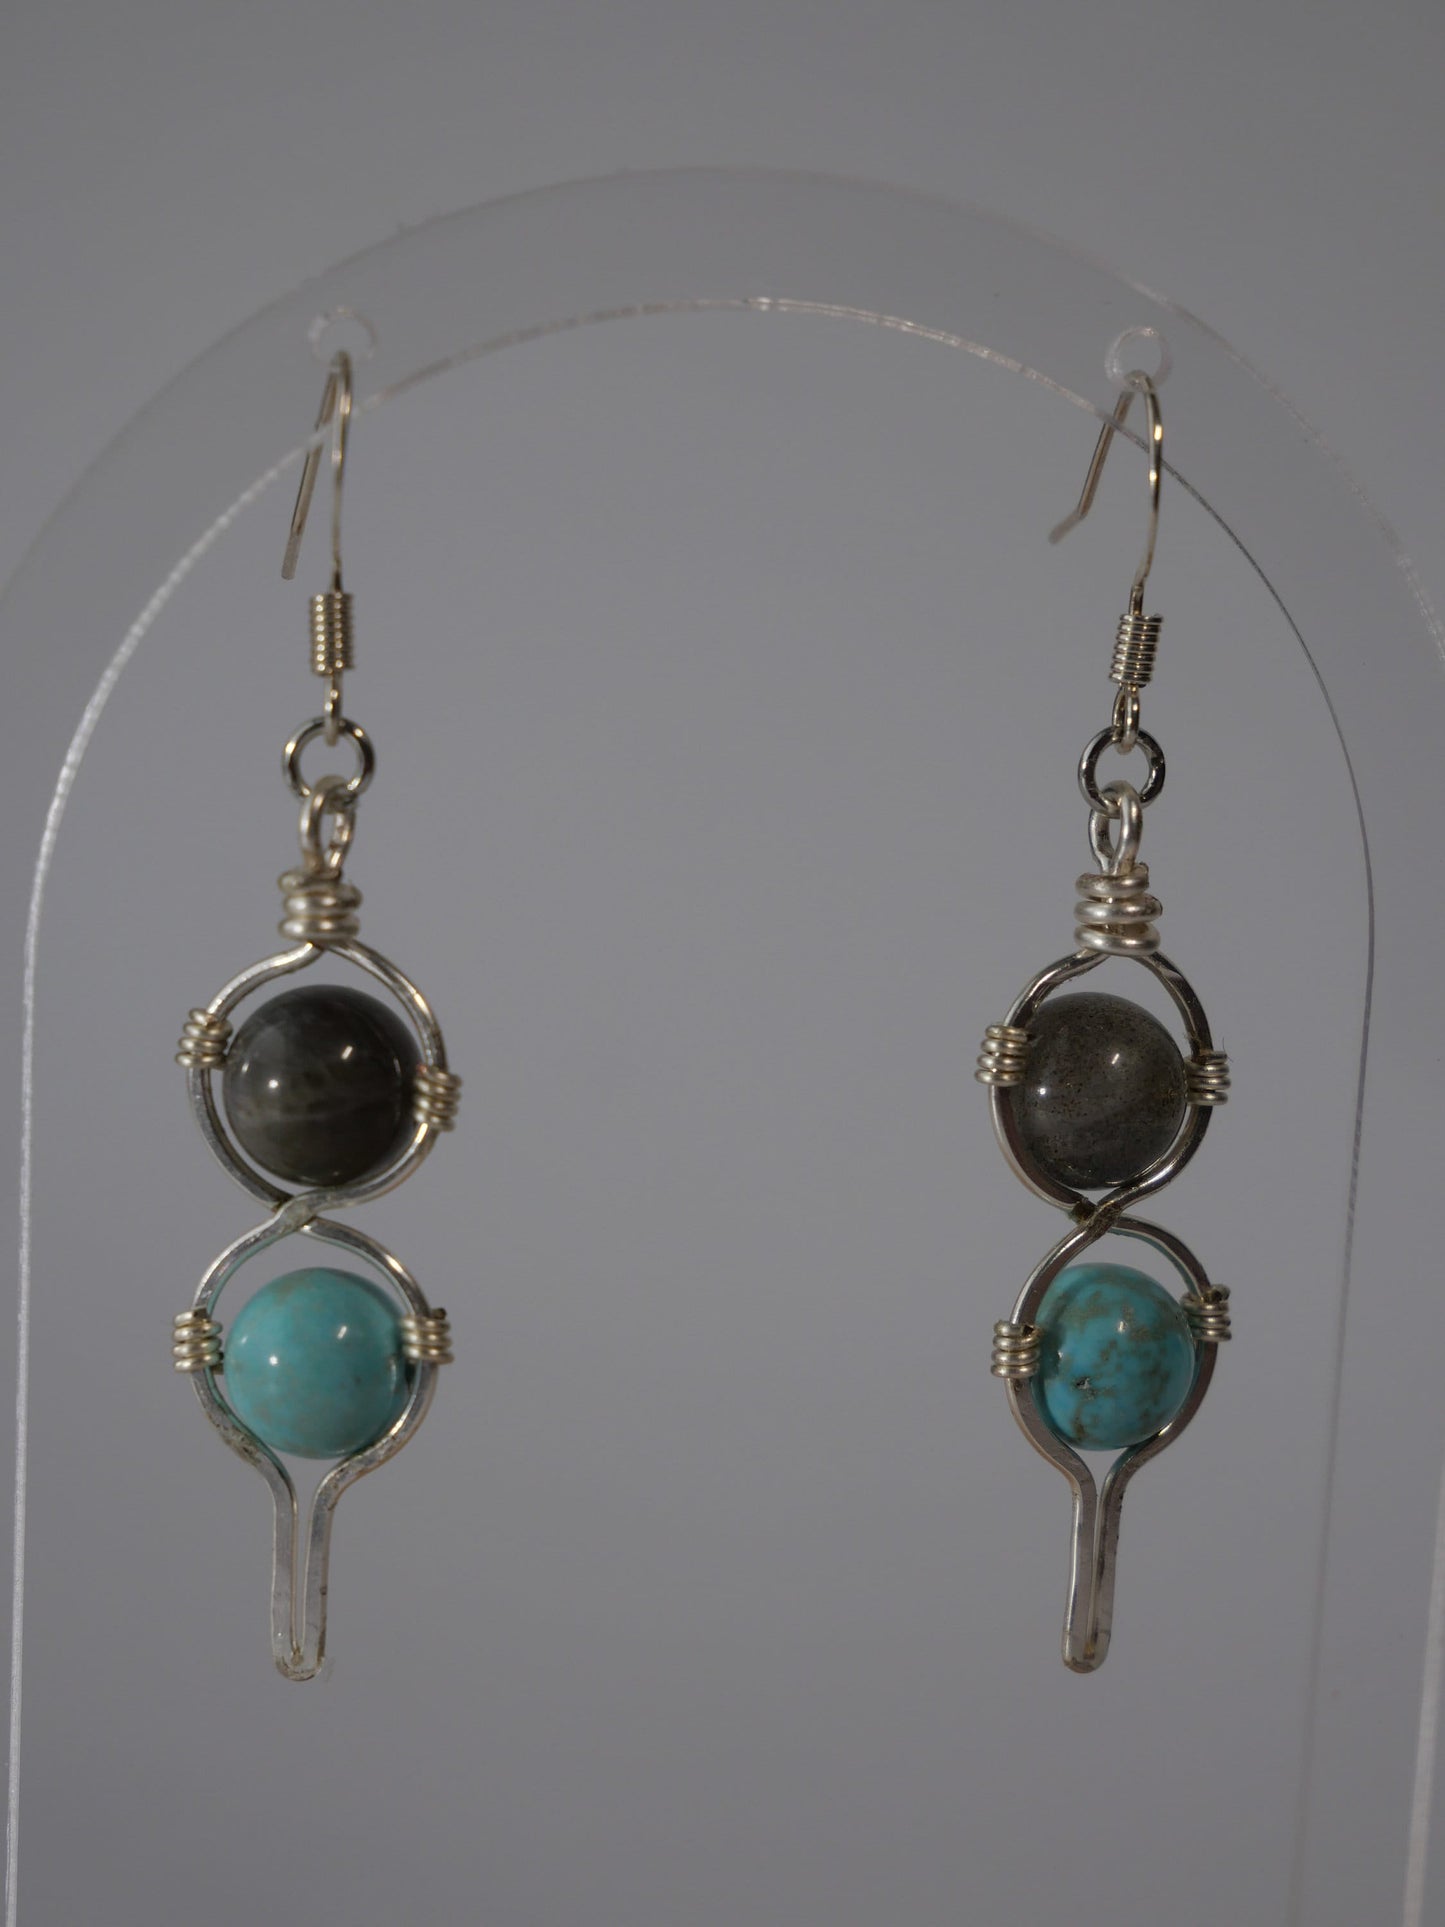 Abstract Wire Earrings, Labradorite and Imitation Turquoise Bead earrings, inspired by Maine, Made in Maine, Maine Art, Maine Jewelry